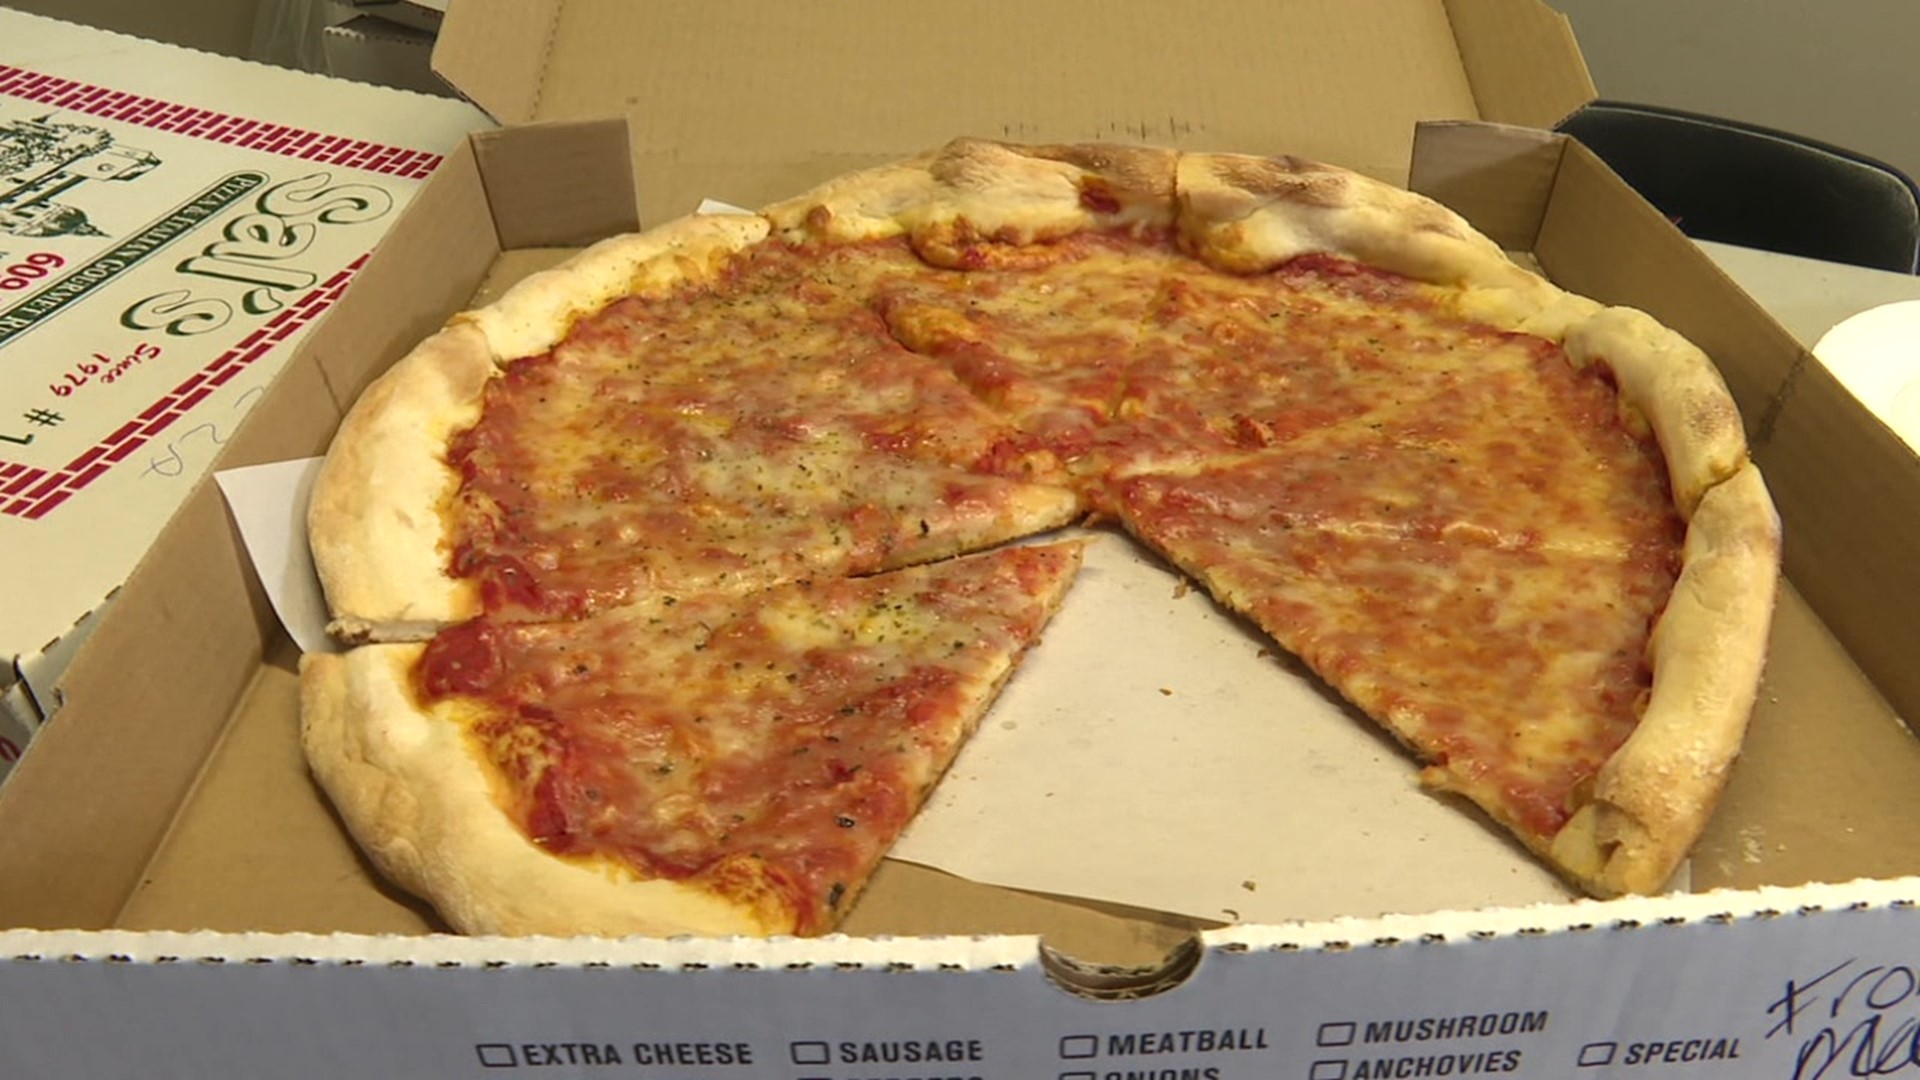 A group of pizzerias in Schuylkill County came together to send free food to workers who have been helping out in the community.